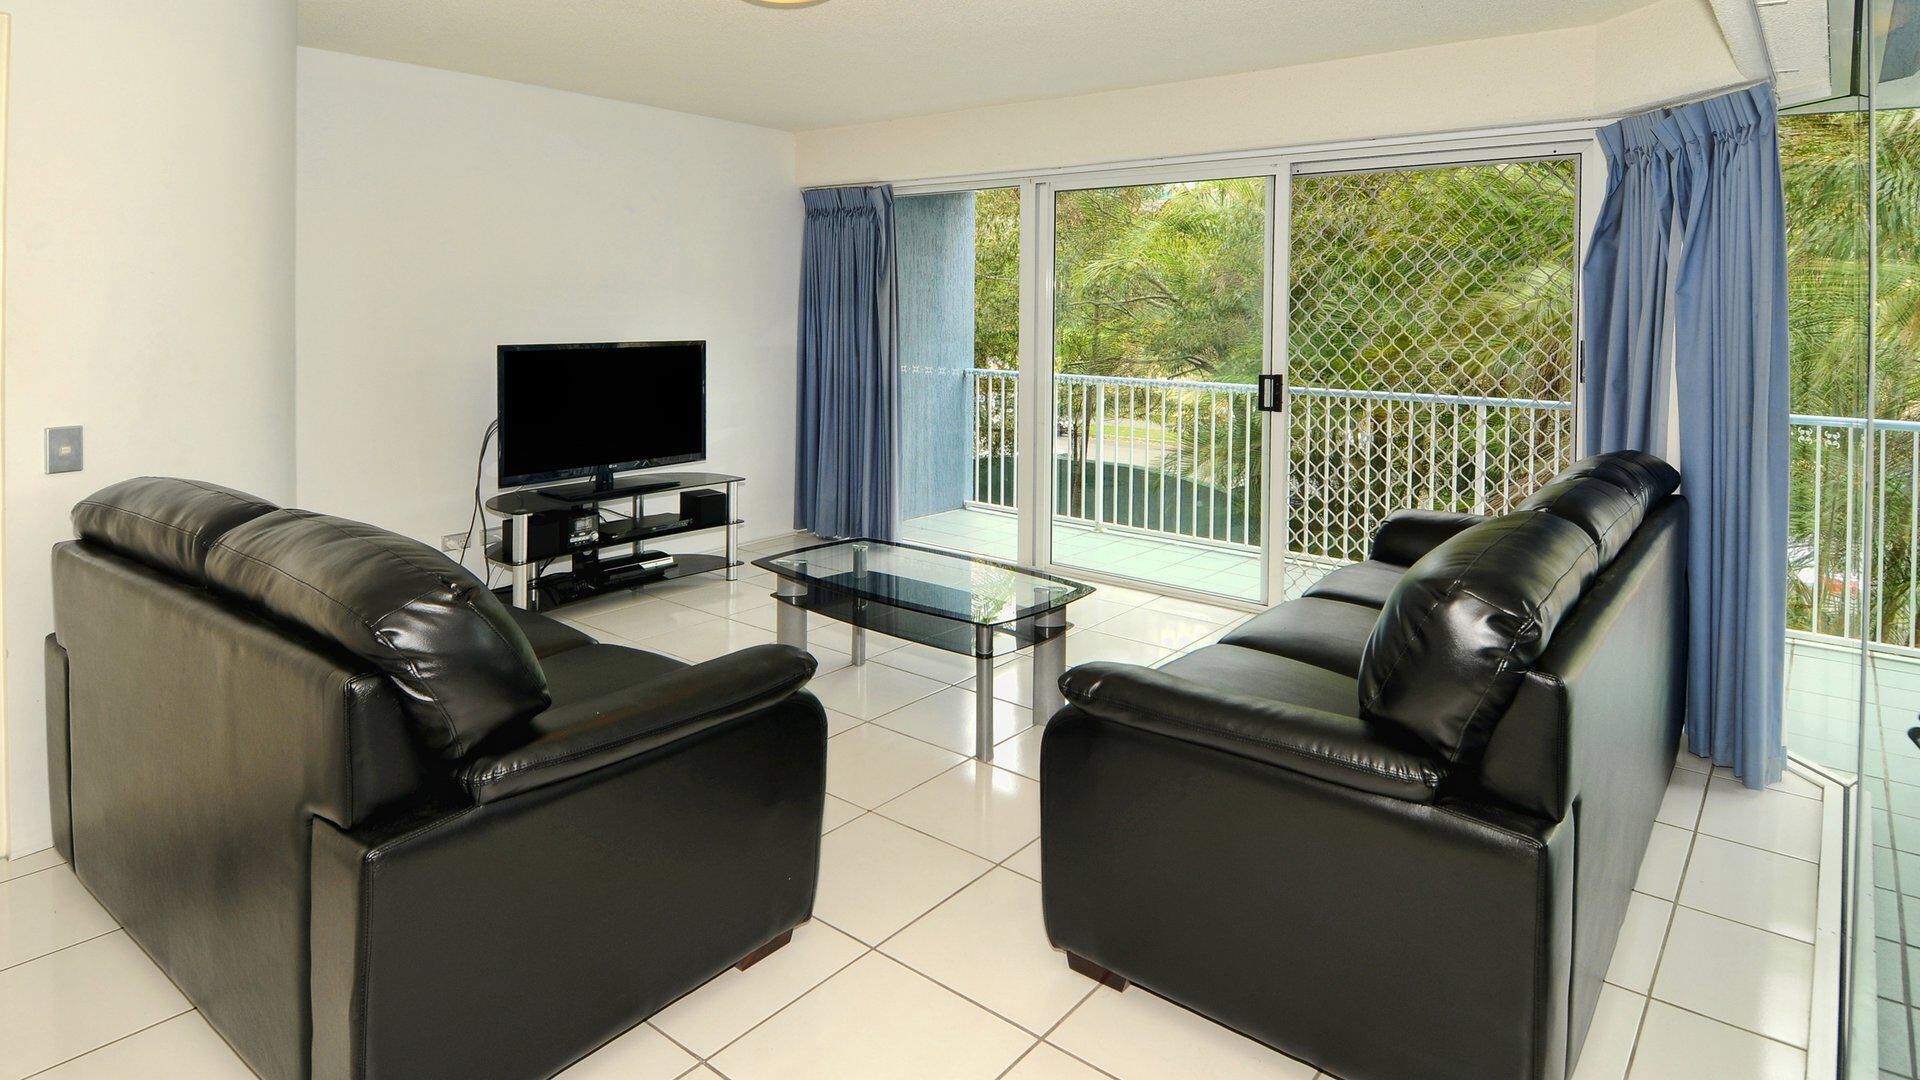 Mainsail 3 - 2 Bedroom unit 100 meters from the Beach!